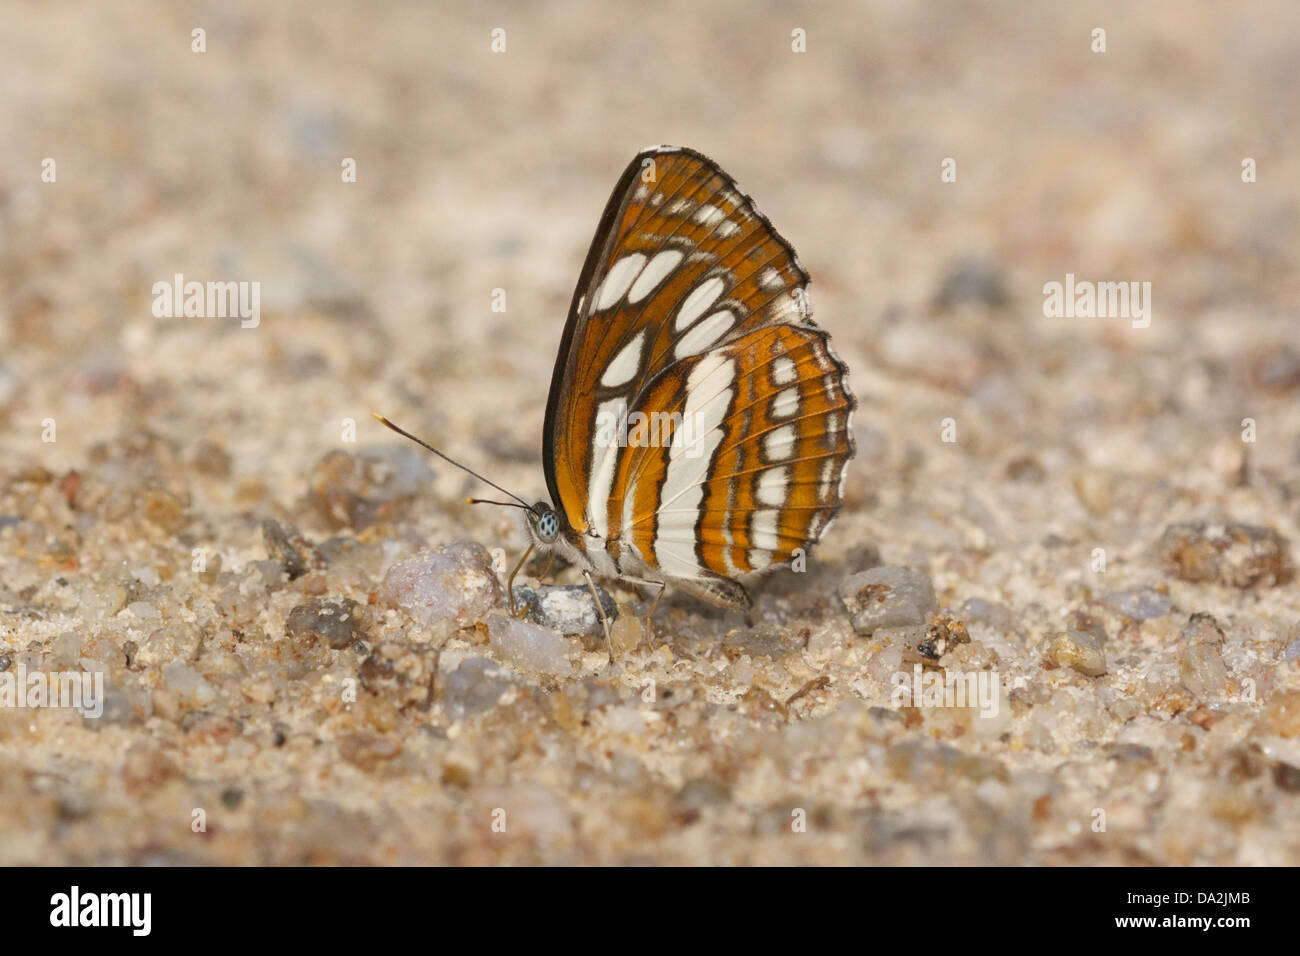 Neptis hylas, known as the Common Sailer, is a species of Nymphalidae butterfly found in South Asia and Southeast Asia. Stock Photo